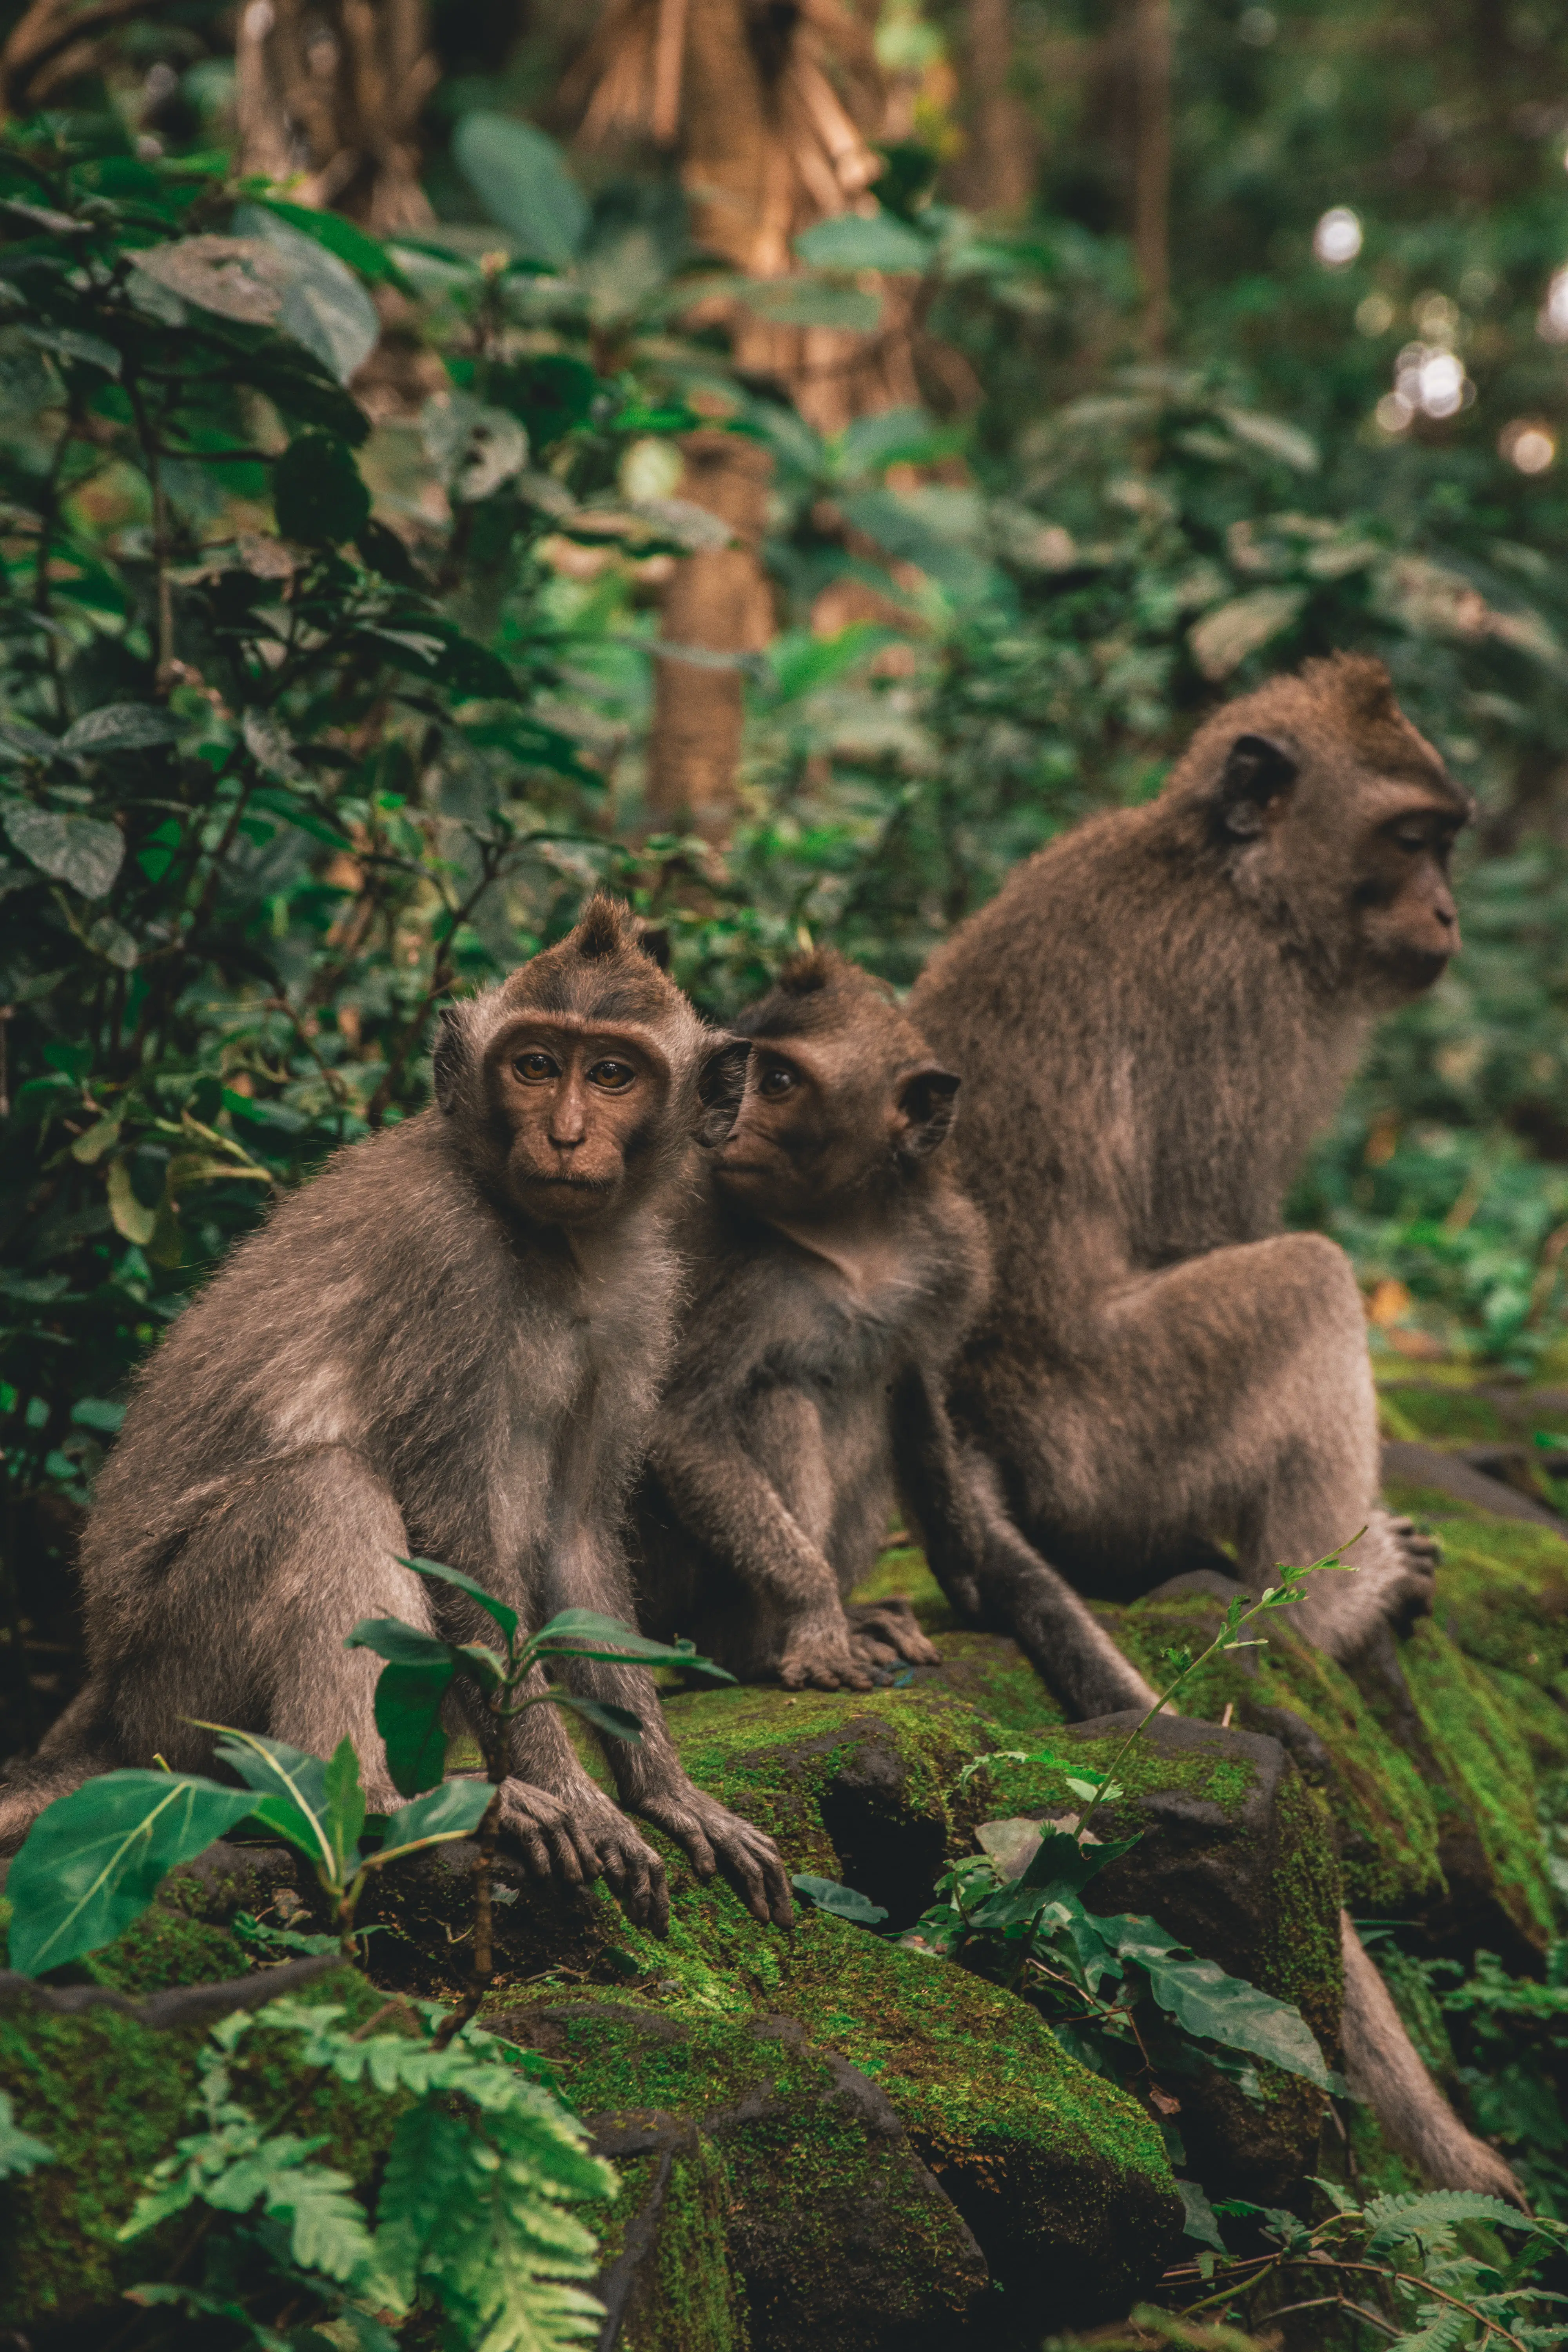 Visit to the Monkey Forest in Ubud, Bali